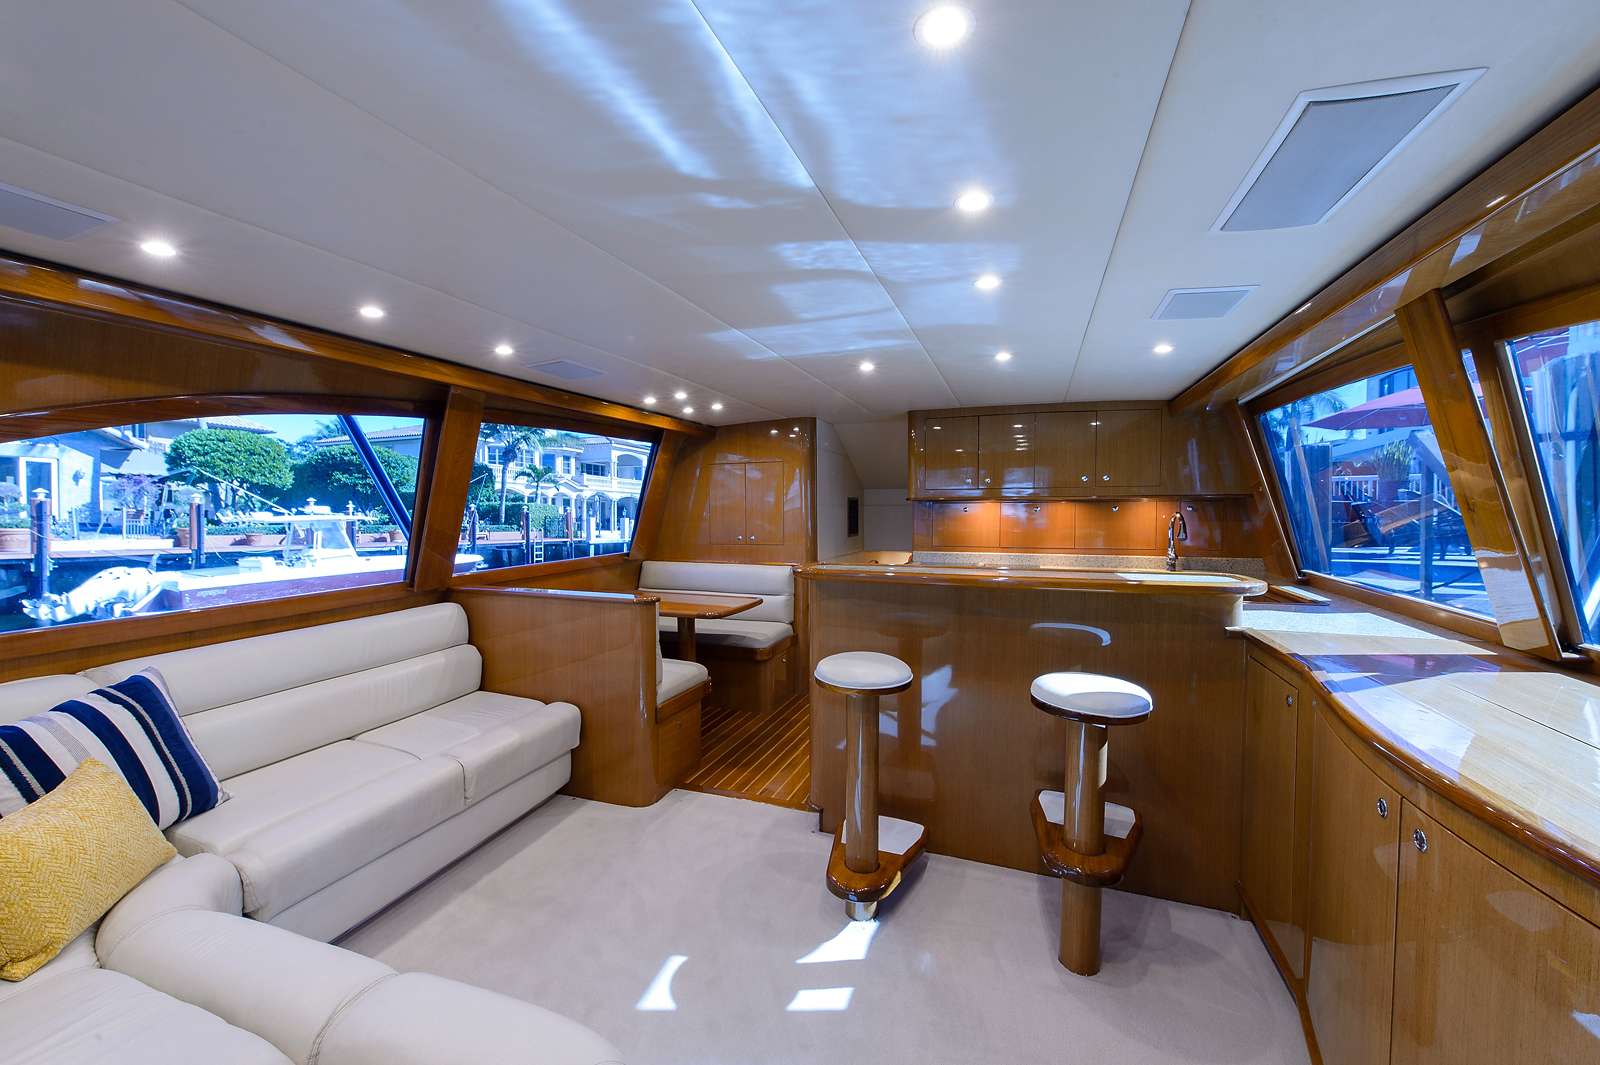 Electric Bill - Yacht Charter Mexico & Boat hire in US East Coast, Bahamas & Mexico 2